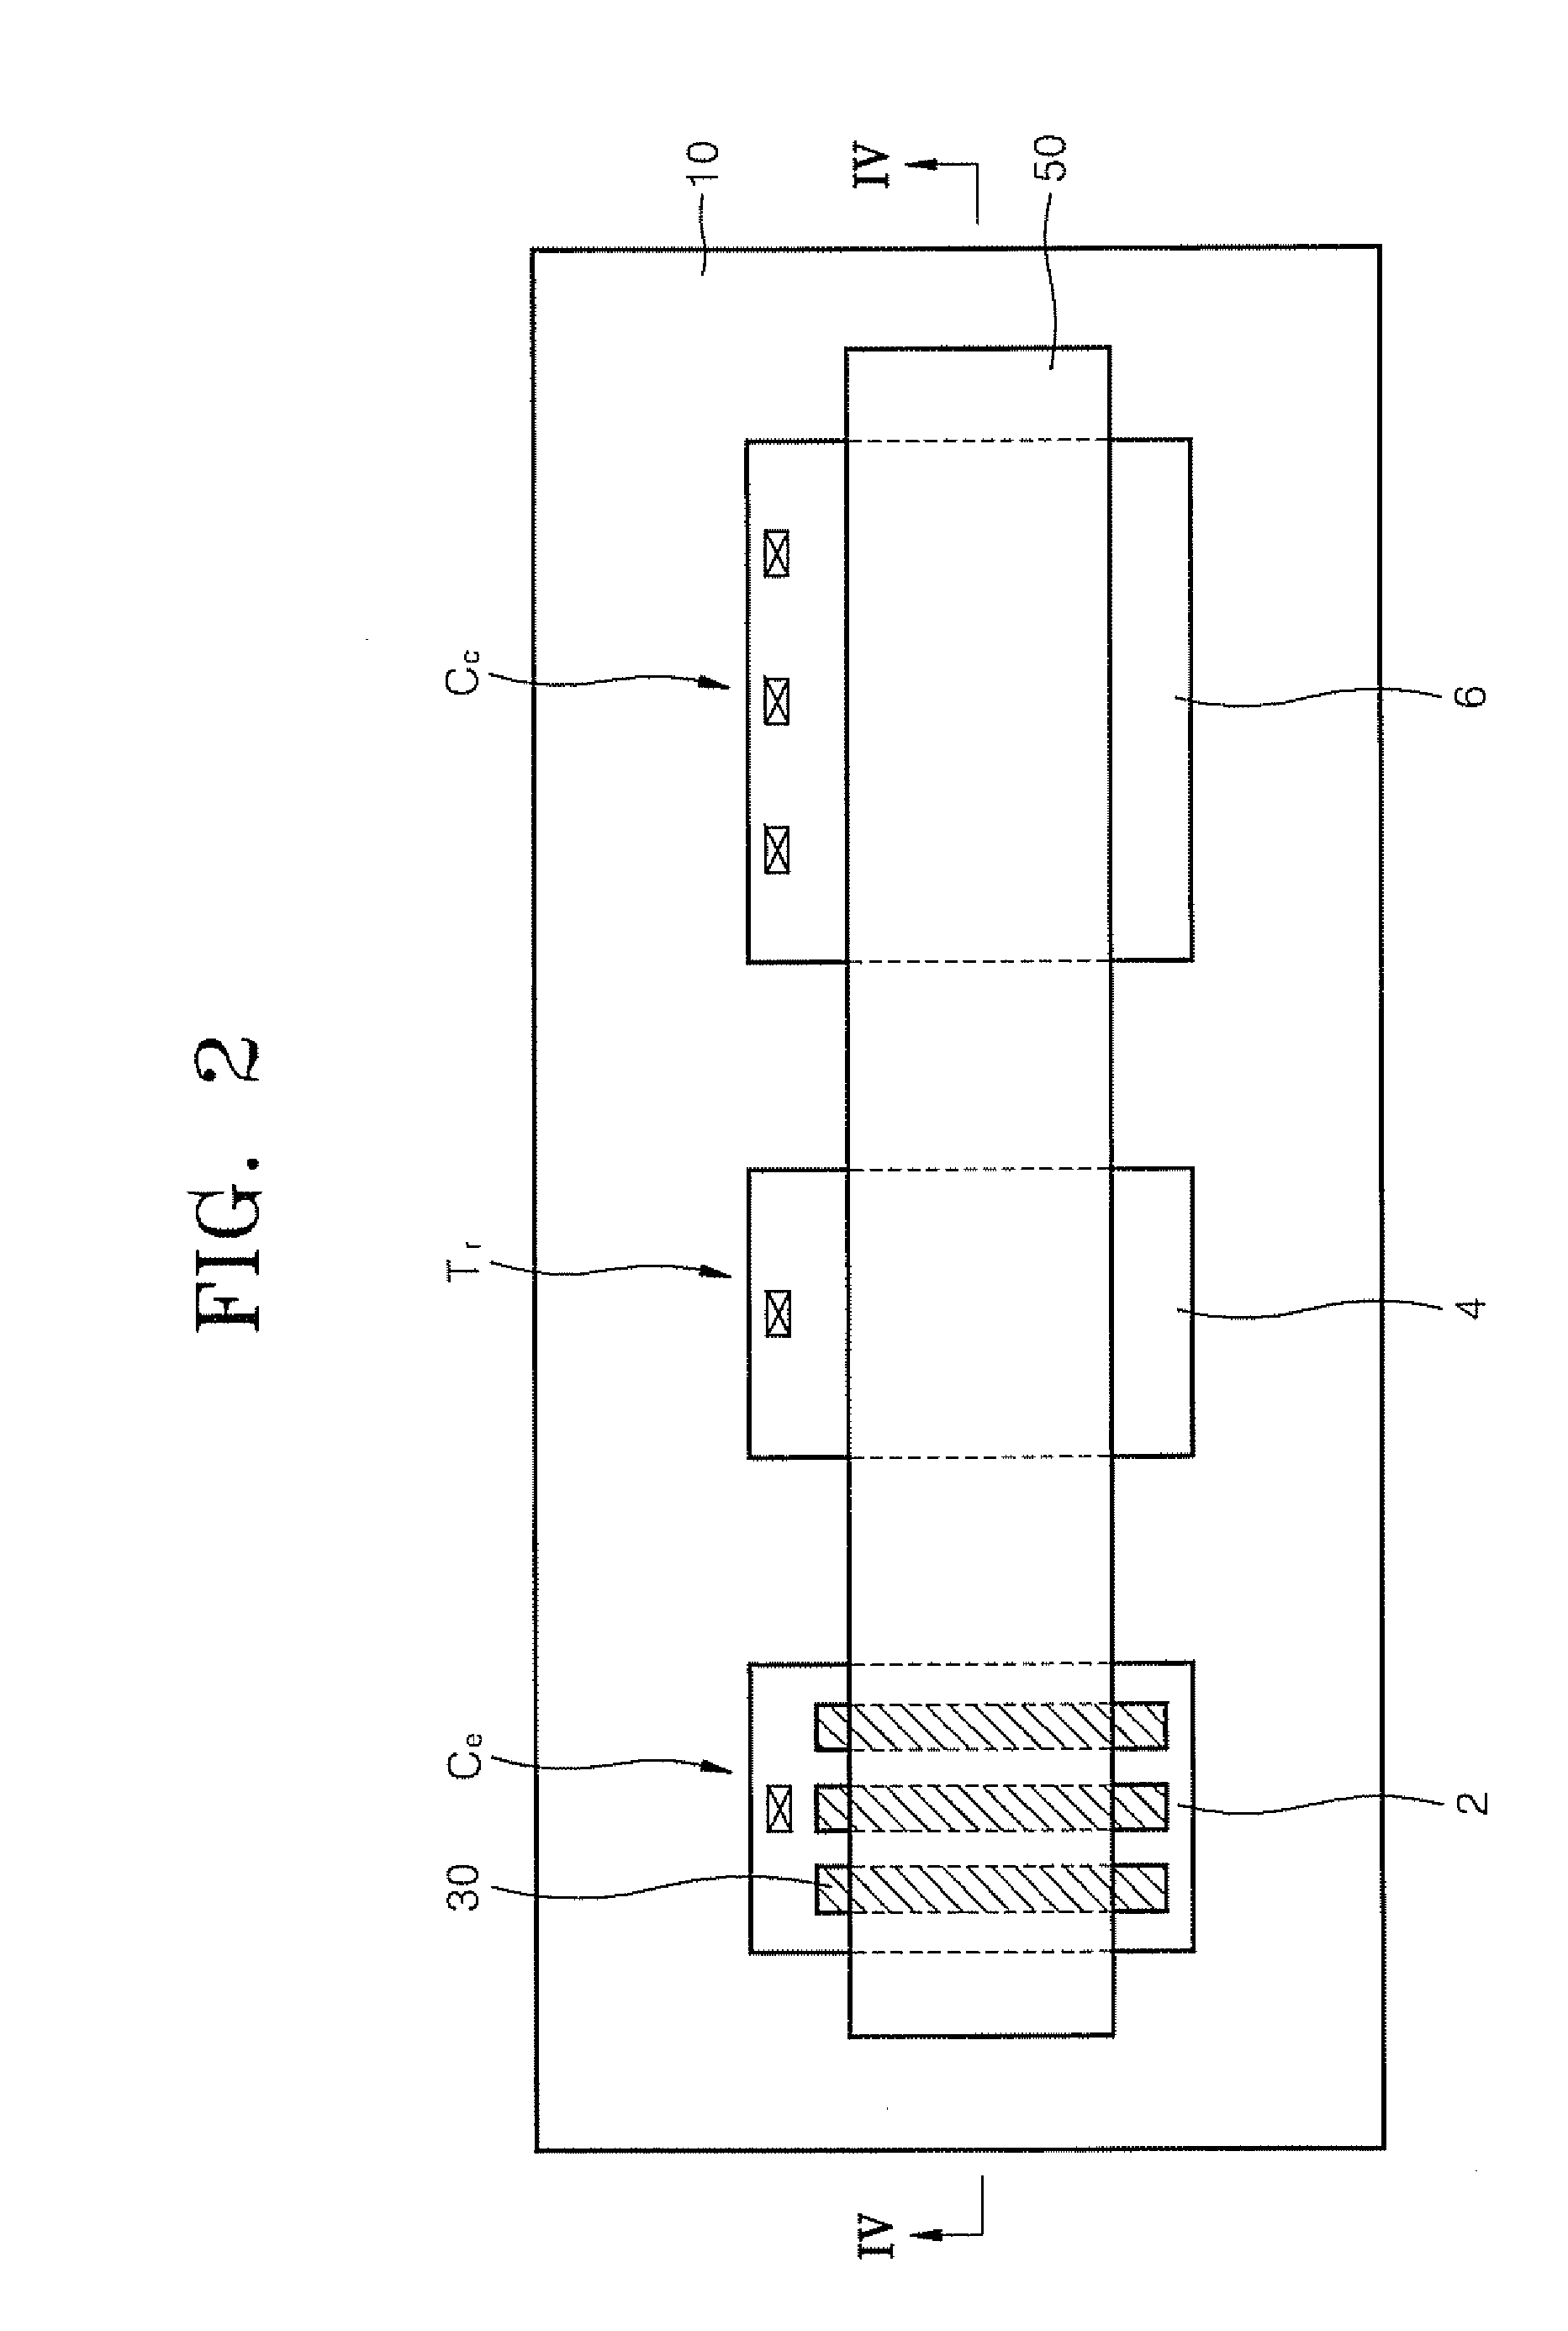 EEPROMs with Trenched Active Region Structures and Methods of Fabricating and Operating Same